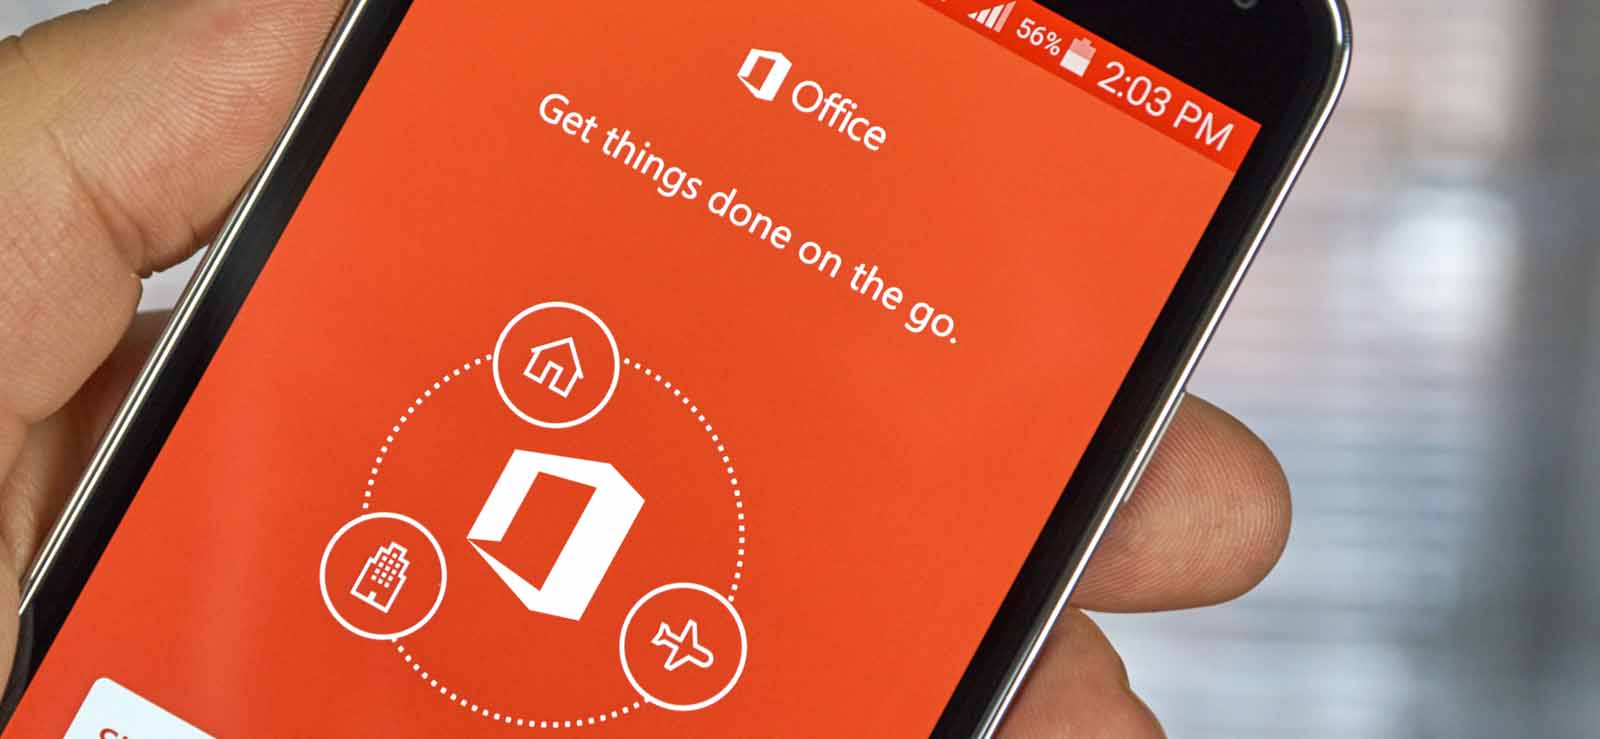 Microsoft Renames Some Office 365 Plans to Microsoft 365